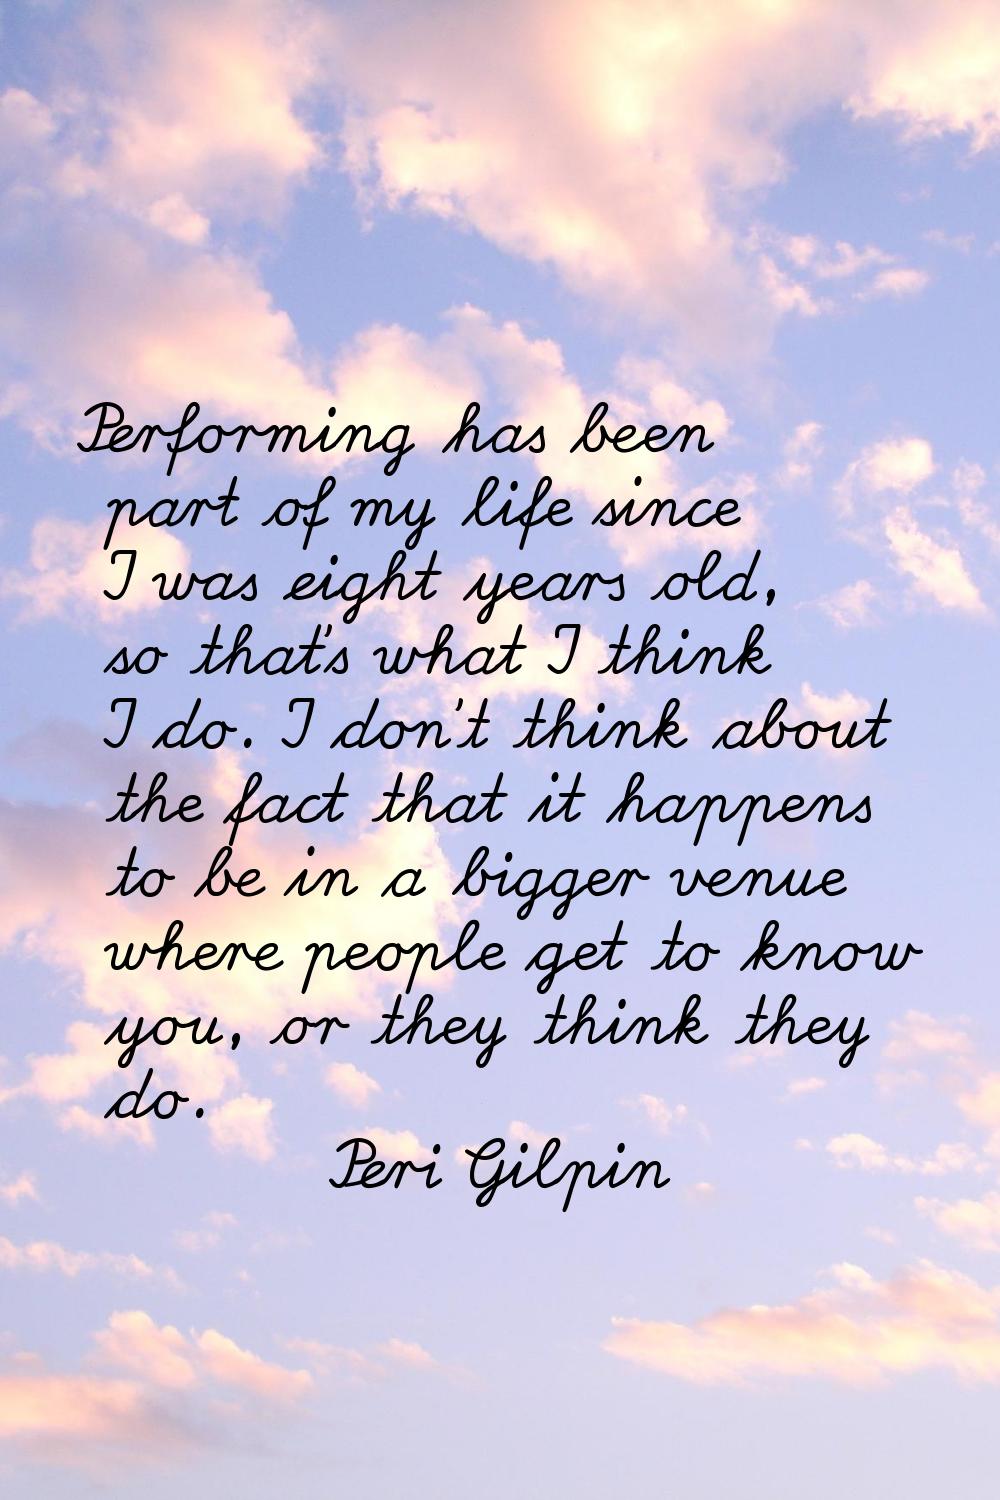 Performing has been part of my life since I was eight years old, so that's what I think I do. I don